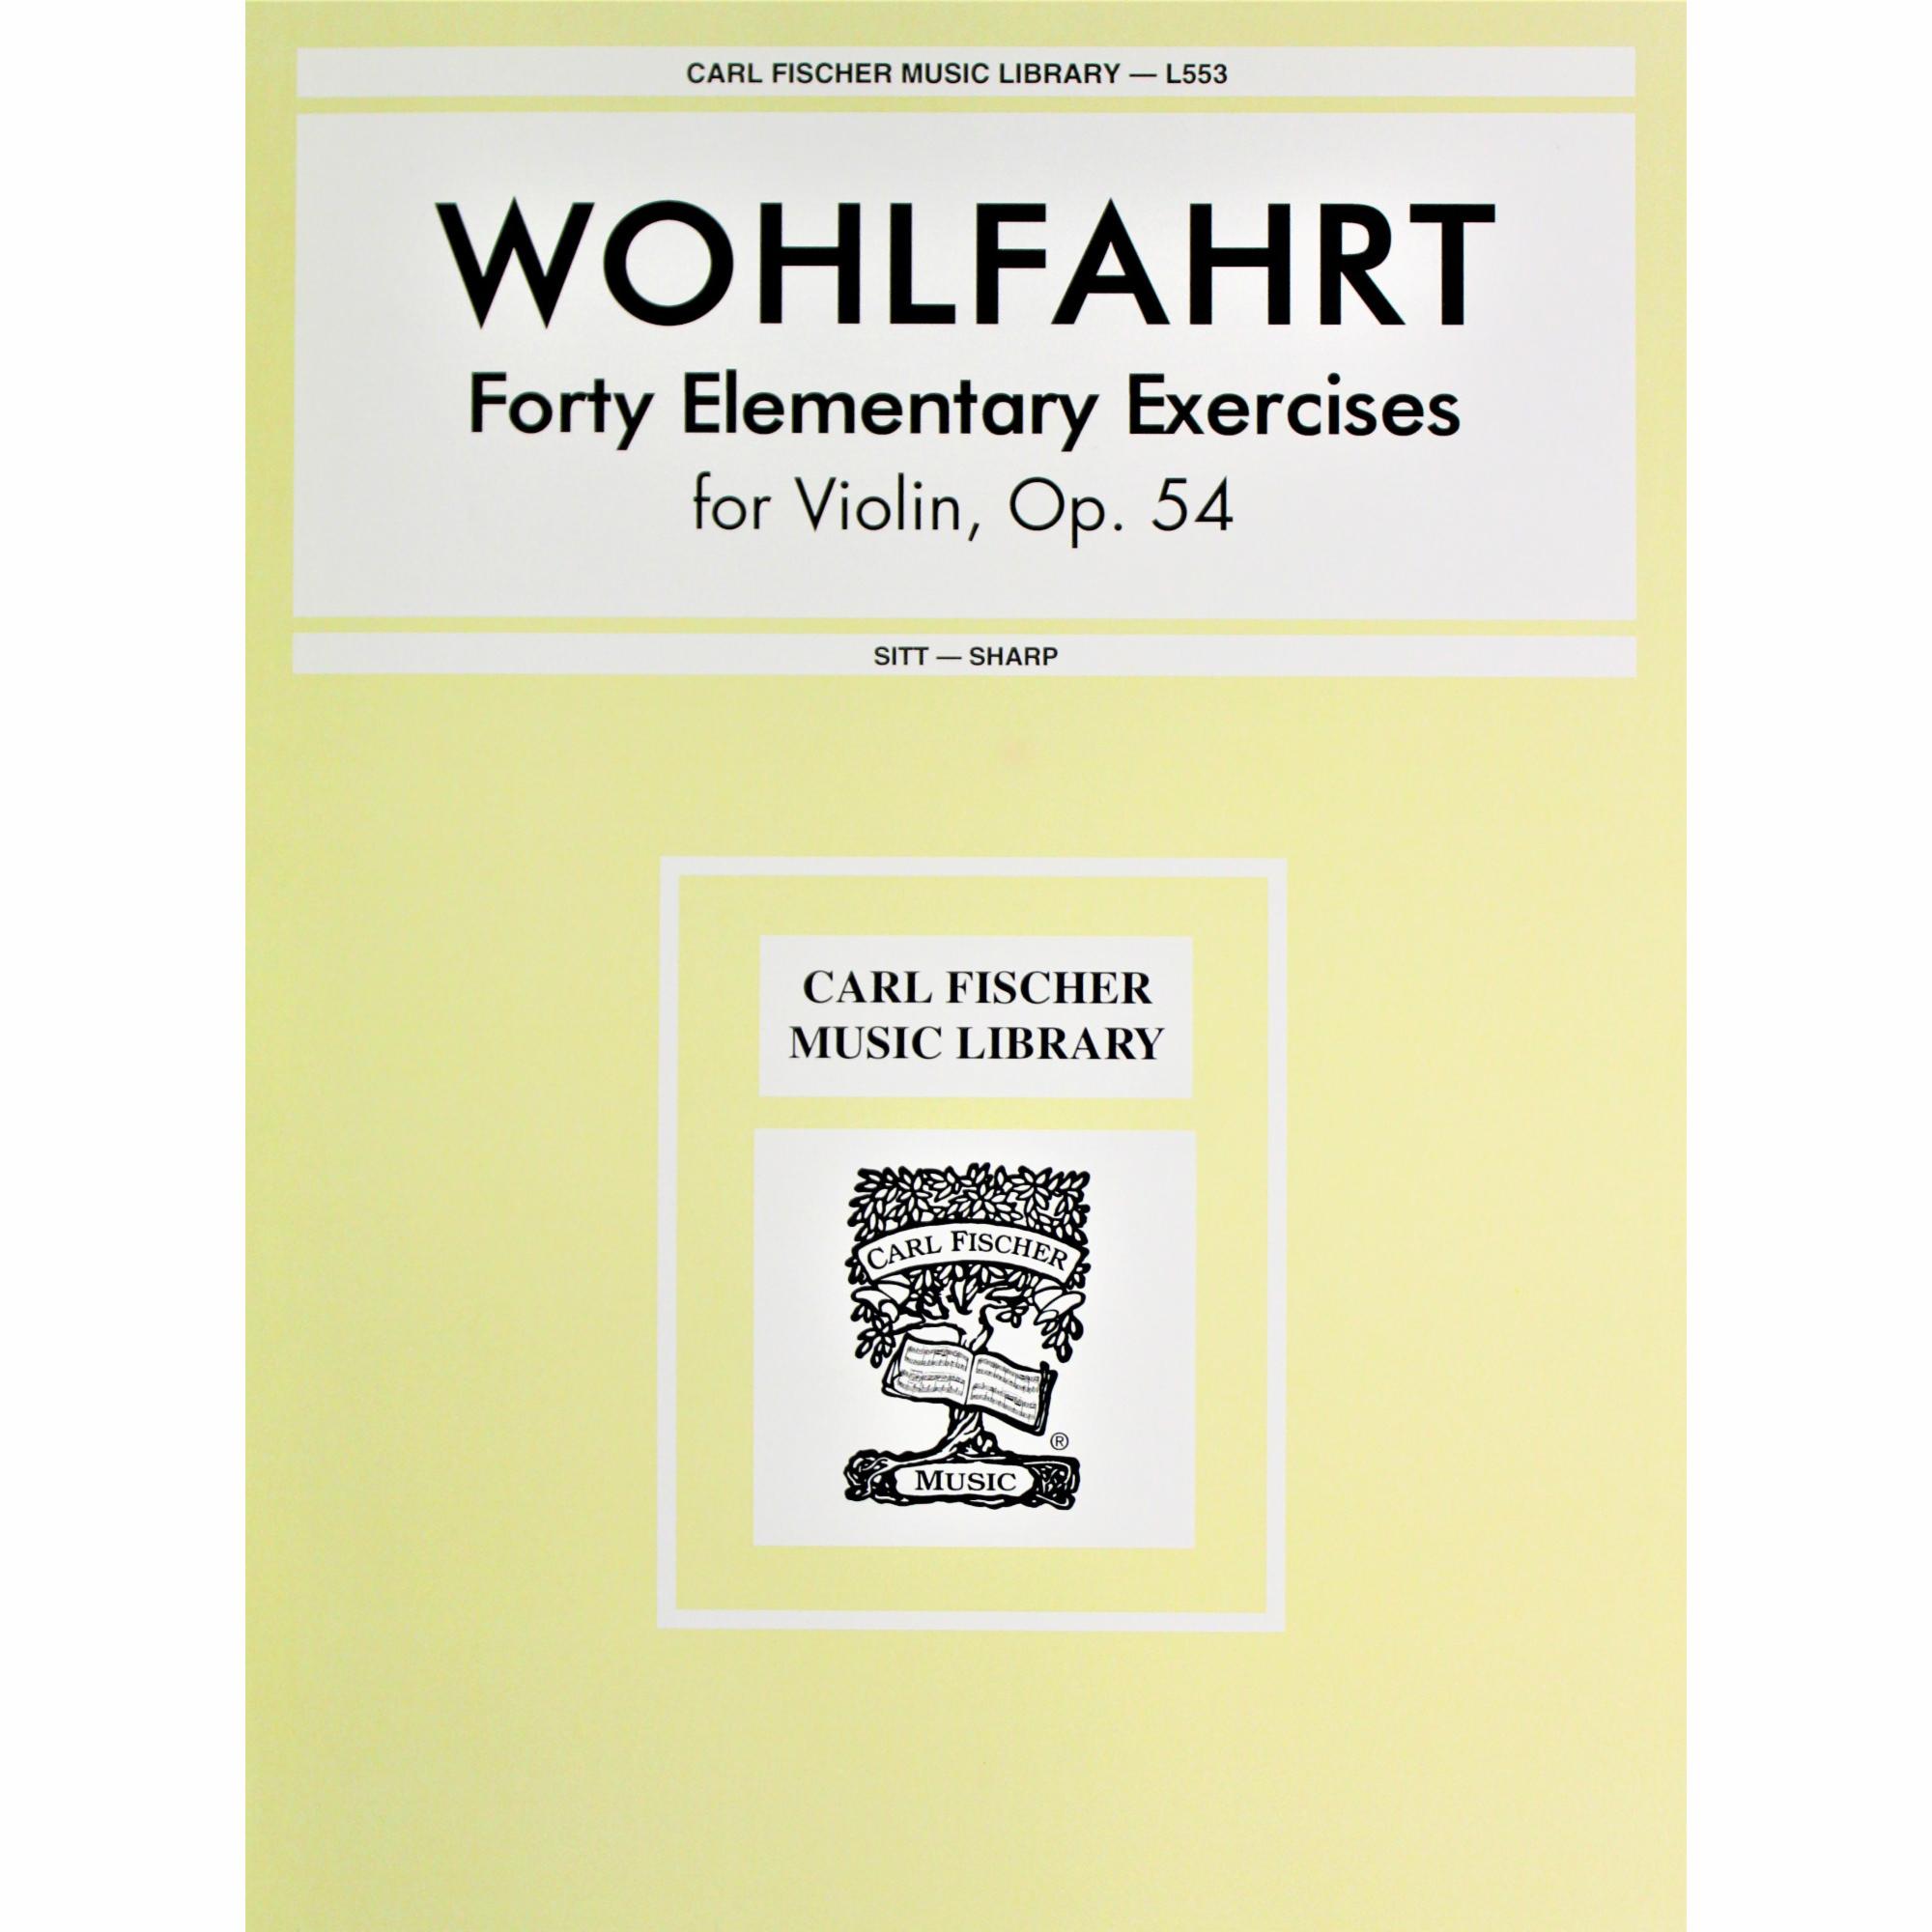 Wohlfahrt -- Forty Elementary Exercises, Op. 54 for Violin